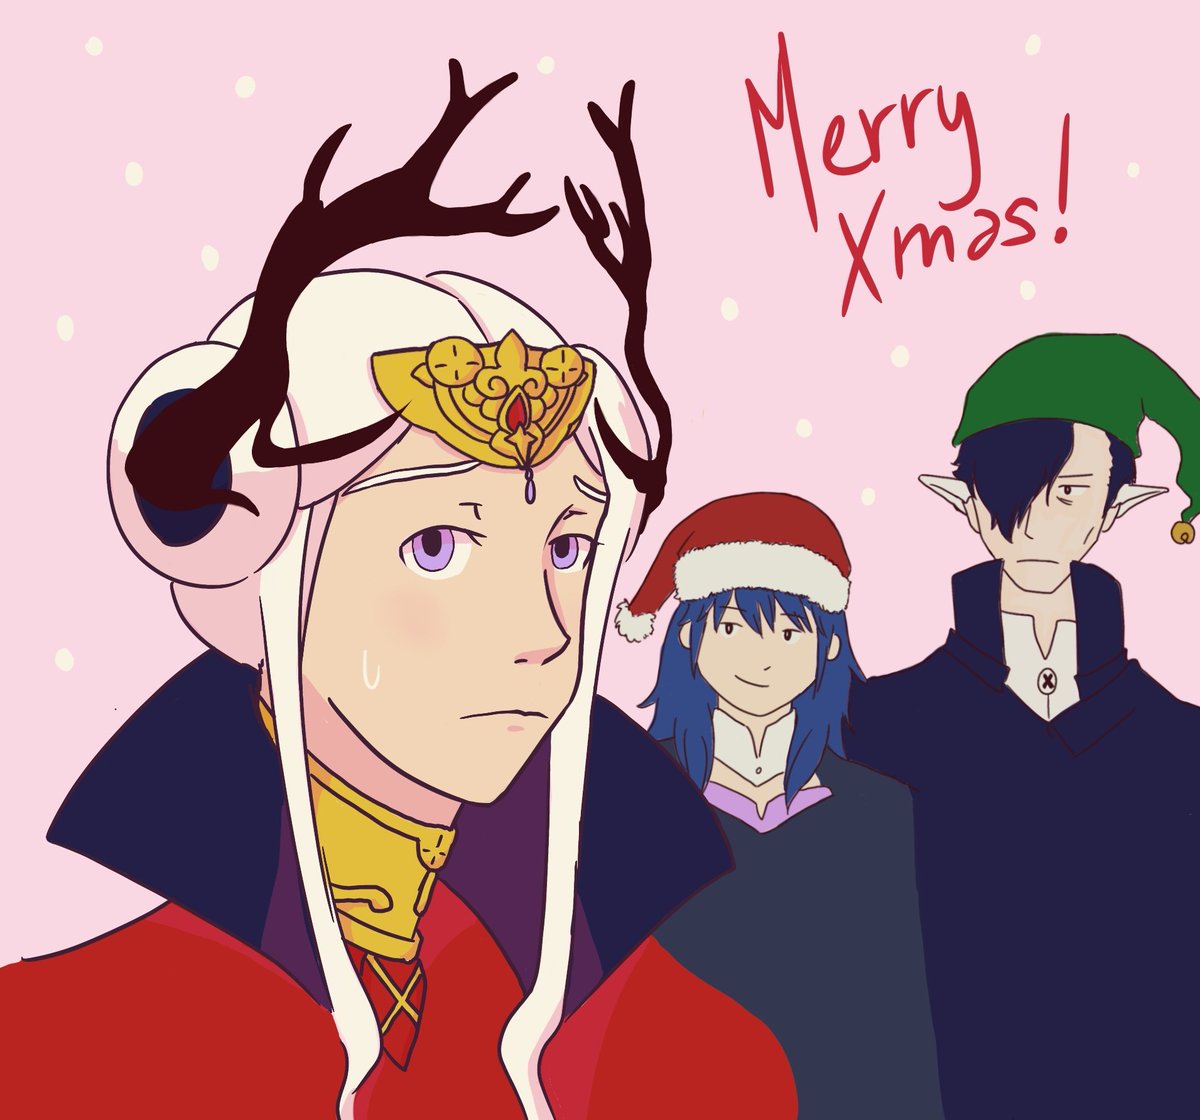 (late) Merry christmas and happy new year from the Adestrian Empire
#fe3h #edeleth #blackeagles #xmas2019